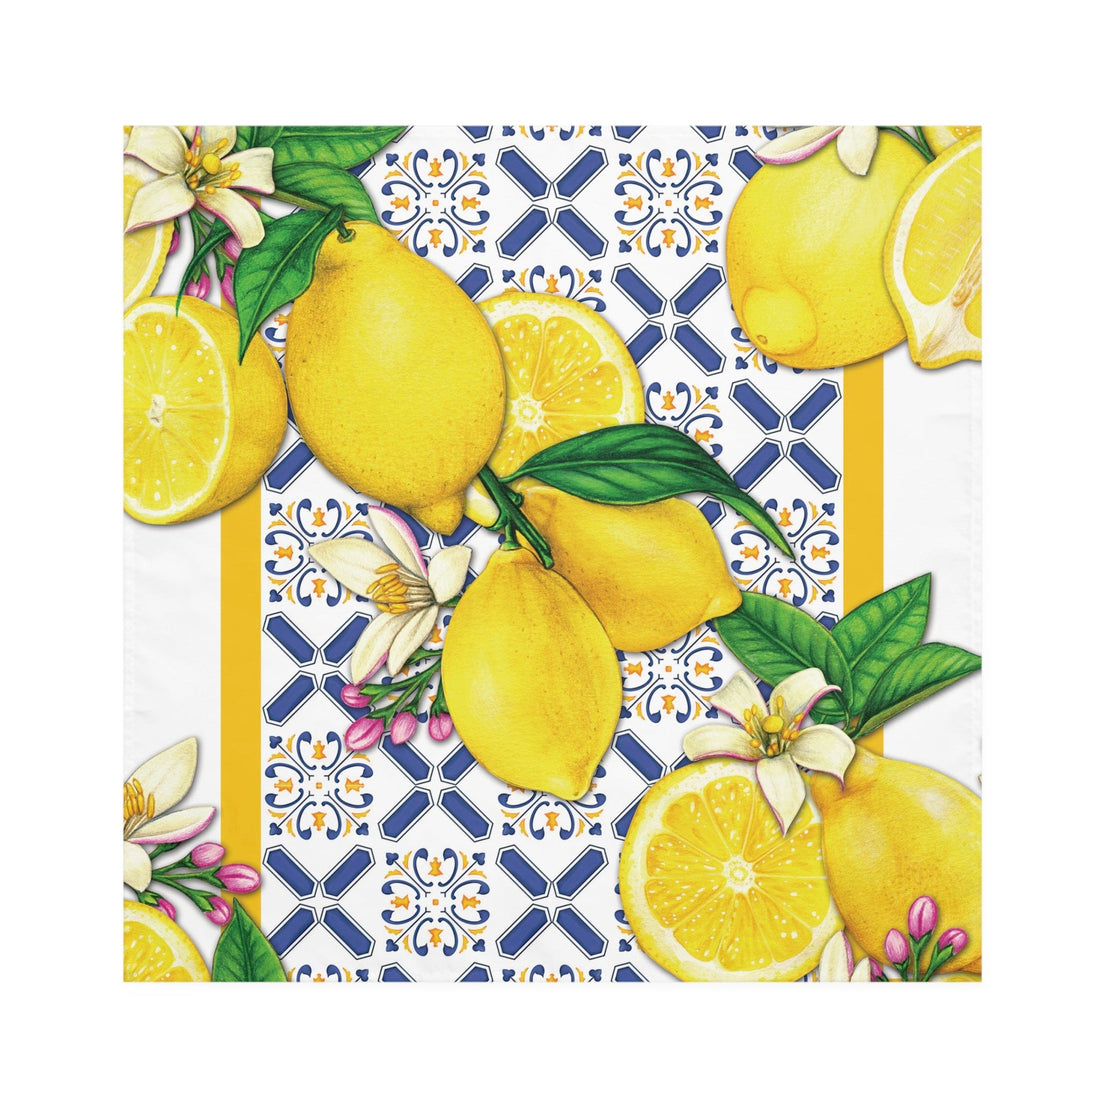 Printify Set of 4 Cobalt Blue and Yellow Cloth Napkins, Lemon &amp; Tiles Design, Mediterranean Floral Dining Table Linens, Fall Home Decor, Hostess Gift Accessories 4-piece set / White / 19&quot; × 19&quot; 26542376096425552686